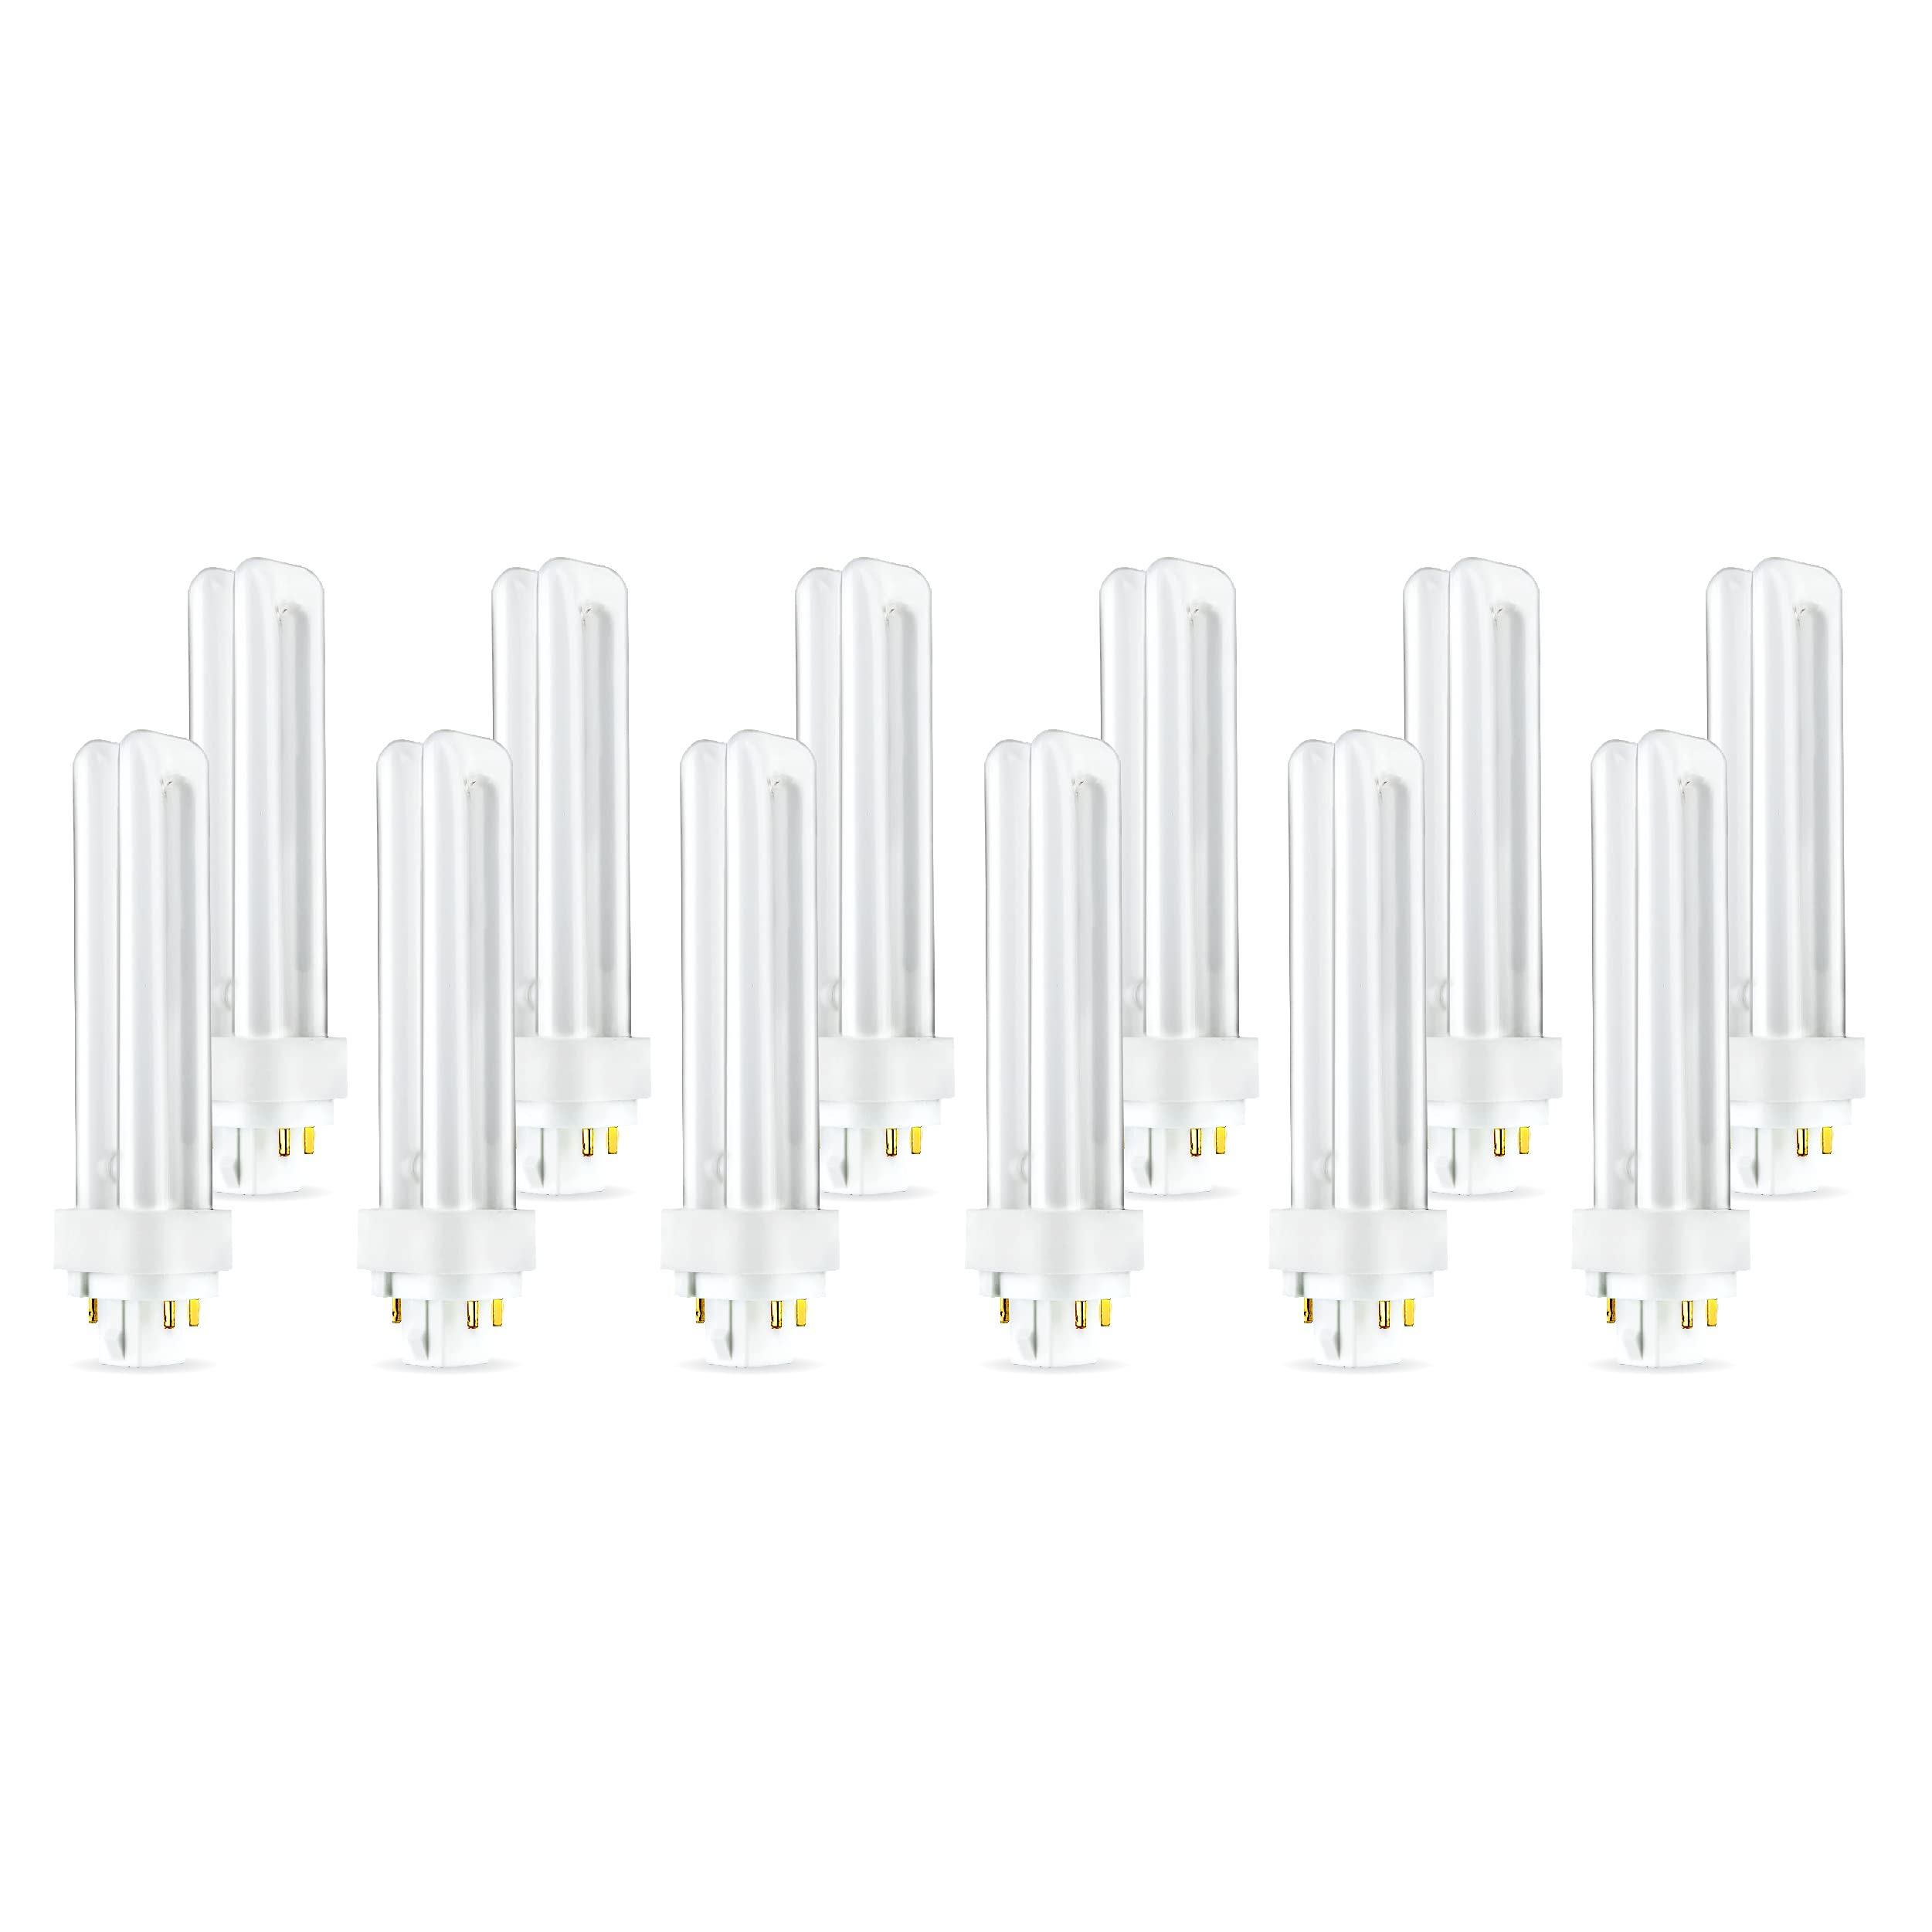 (12 Pack) PLC-13W 835, 4 Pin G24q-1, 13 Watt Double Tube, Compact Fluorescent Light Bulb, Replaces Philips 38327-3, GE 97596 and Sylvania 20671  - Very Good